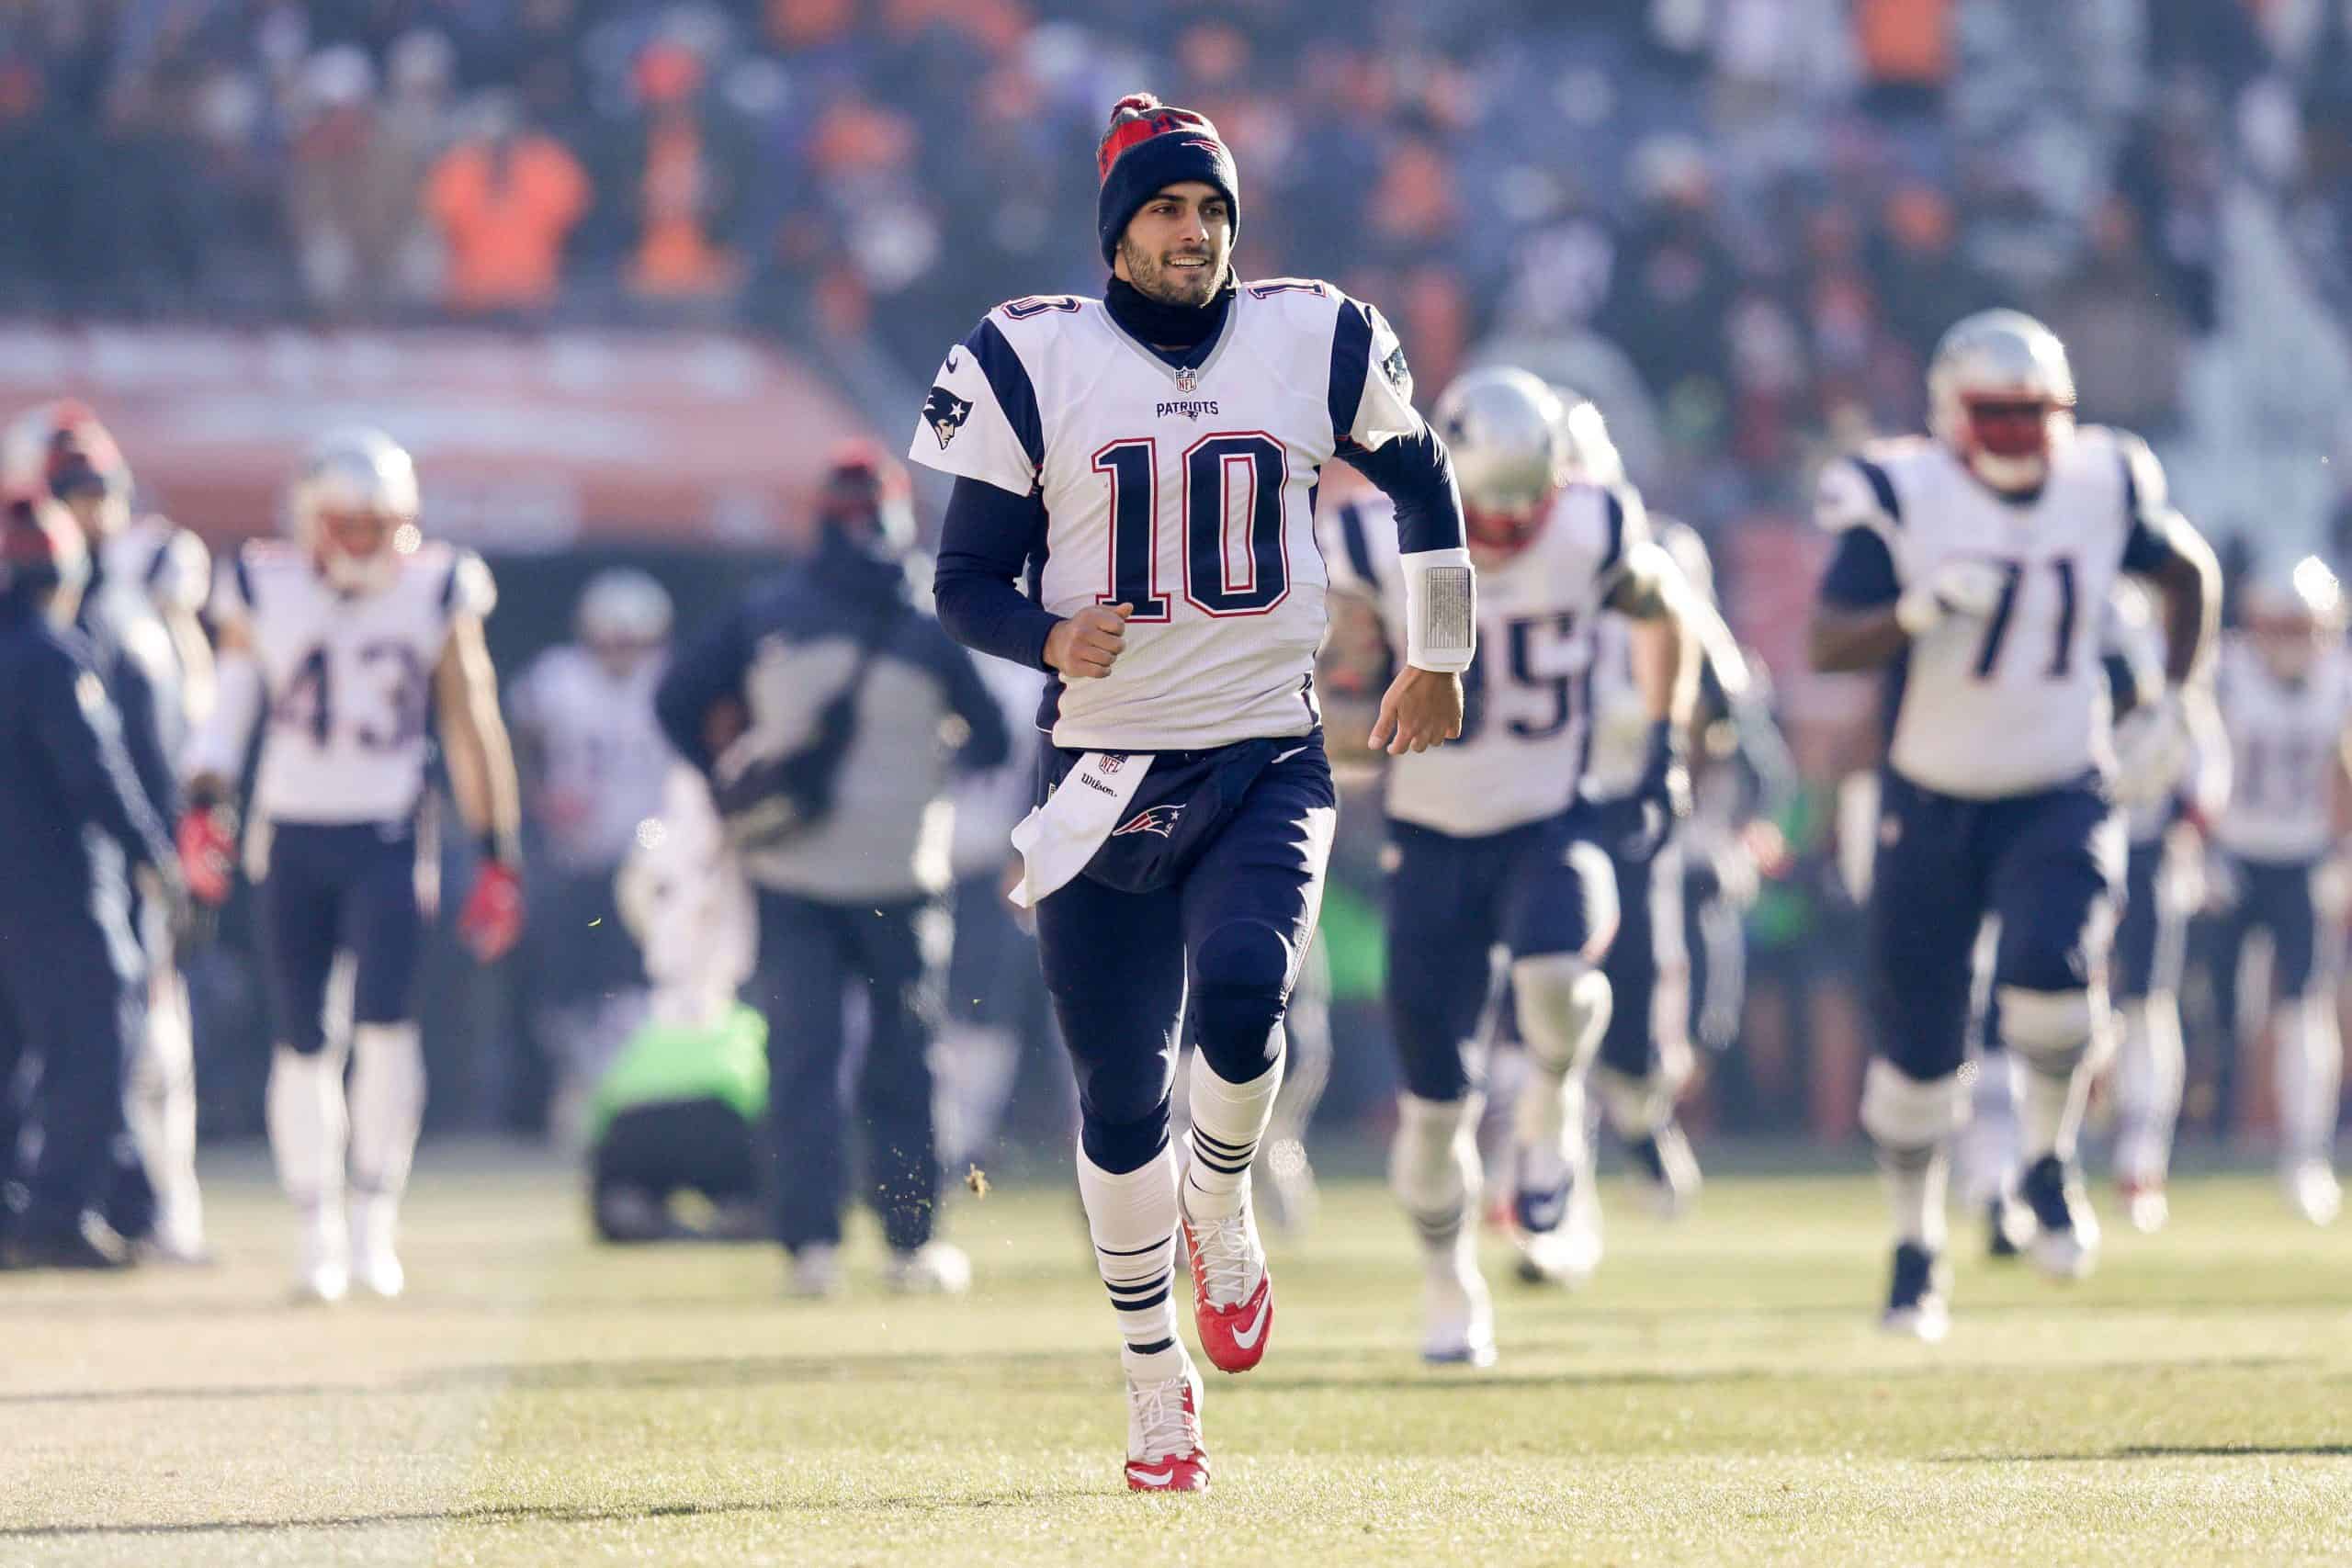 Dec 18, 2016; Denver, CO, USA; New England Patriots quarterback Jimmy Garoppolo (10) runs onto the field before the game at Sports Authority Field at Mile High. Mandatory Credit: Isaiah J. Downing-USA TODAY Sports